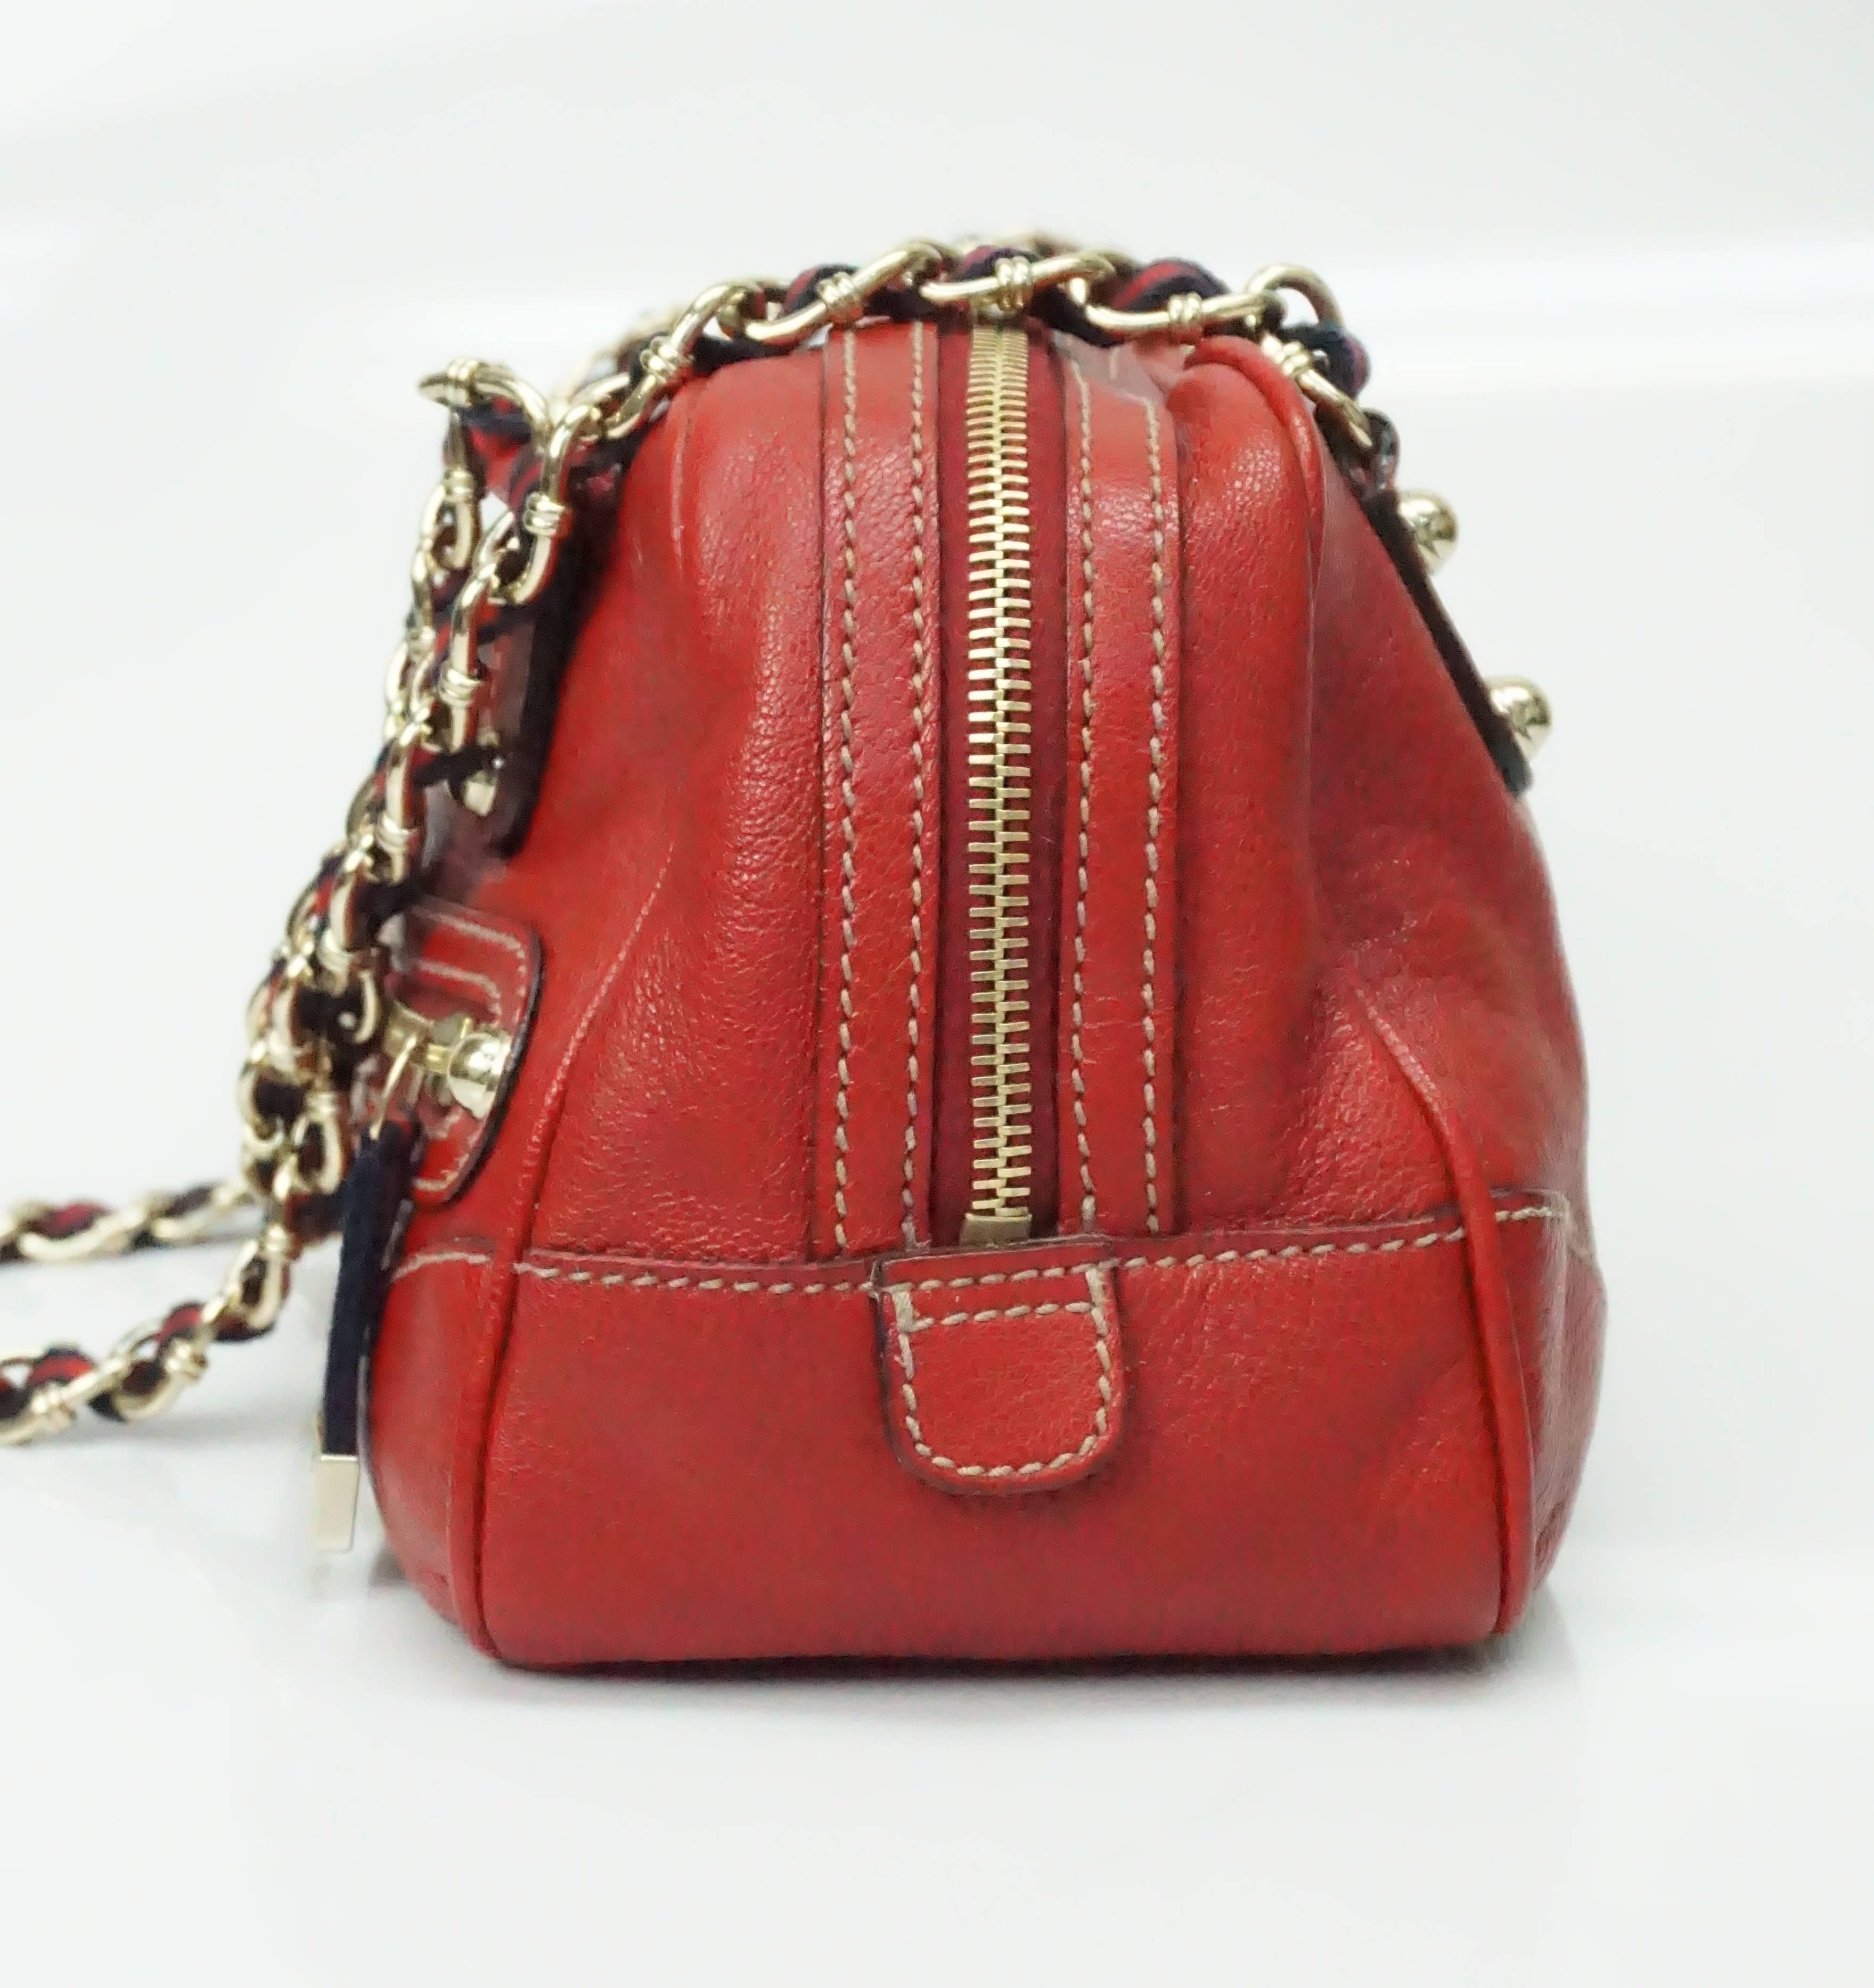 Gucci Red Leather Capri Boston Shoulder Handbag - GHW  This very stunning red Gucci handbag is truly one of my favorites. It has 2 chain large link shoulder straps that have the blue and red stripe Gucci ribbon running through it. The same ribbon